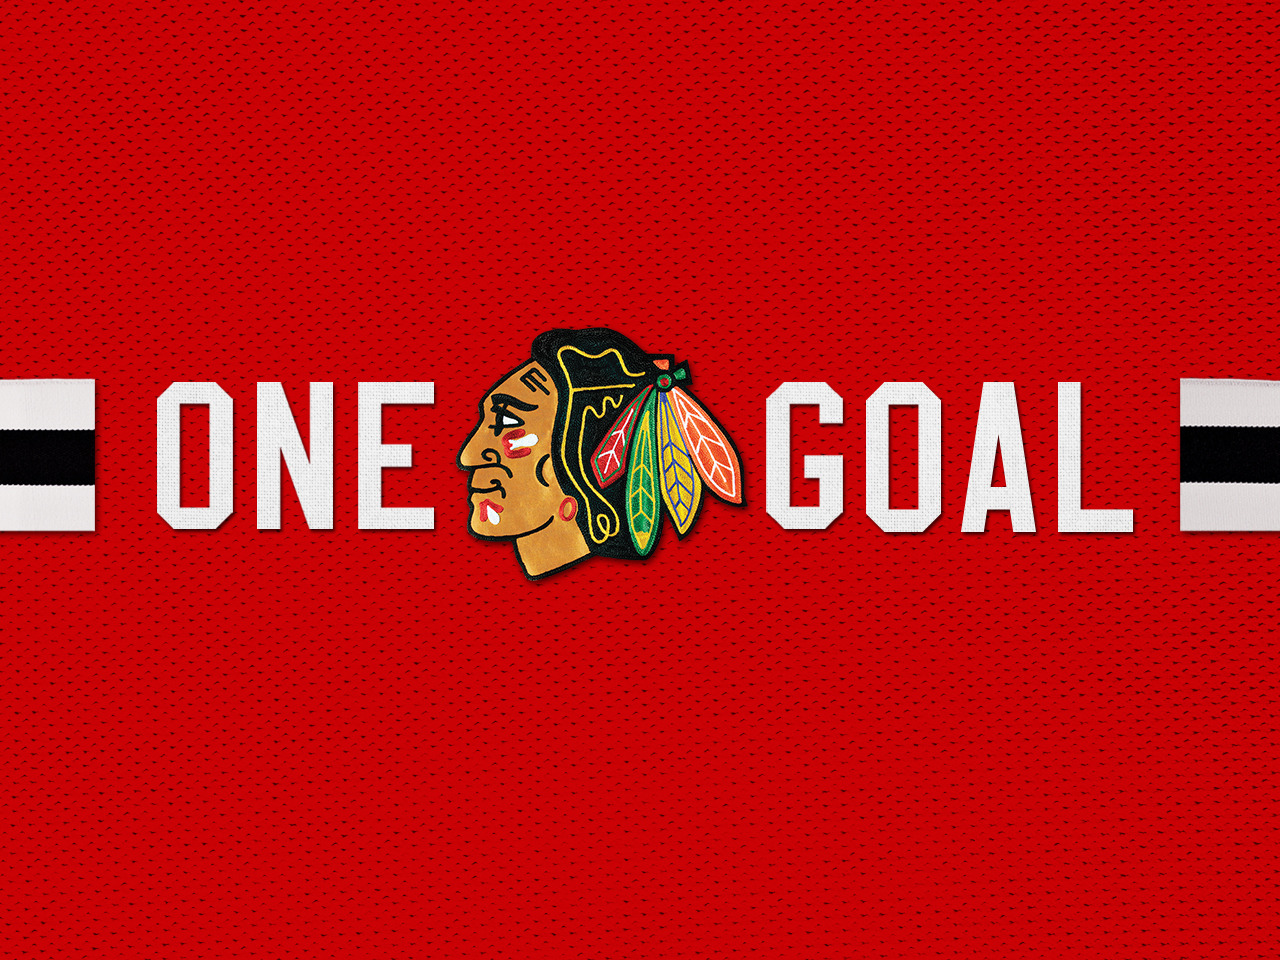 Blackhawks Whats Your Goal Campaign Is A Huge Success